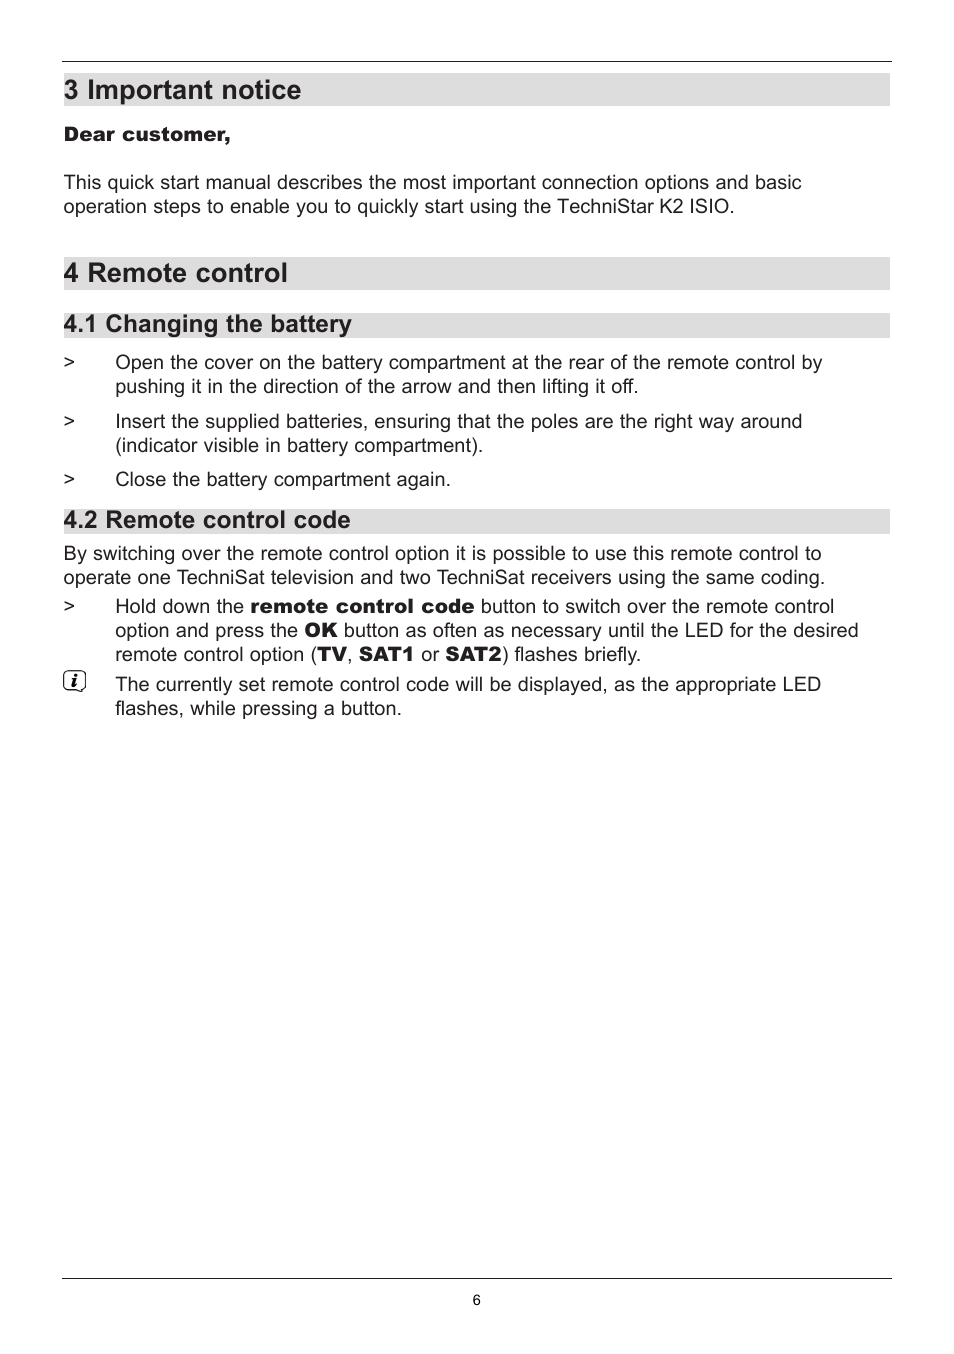 3 important notice, 4 remote control, 1 changing the battery | TechniSat TechniStar  K2 ISIO User Manual | Page 6 / 36